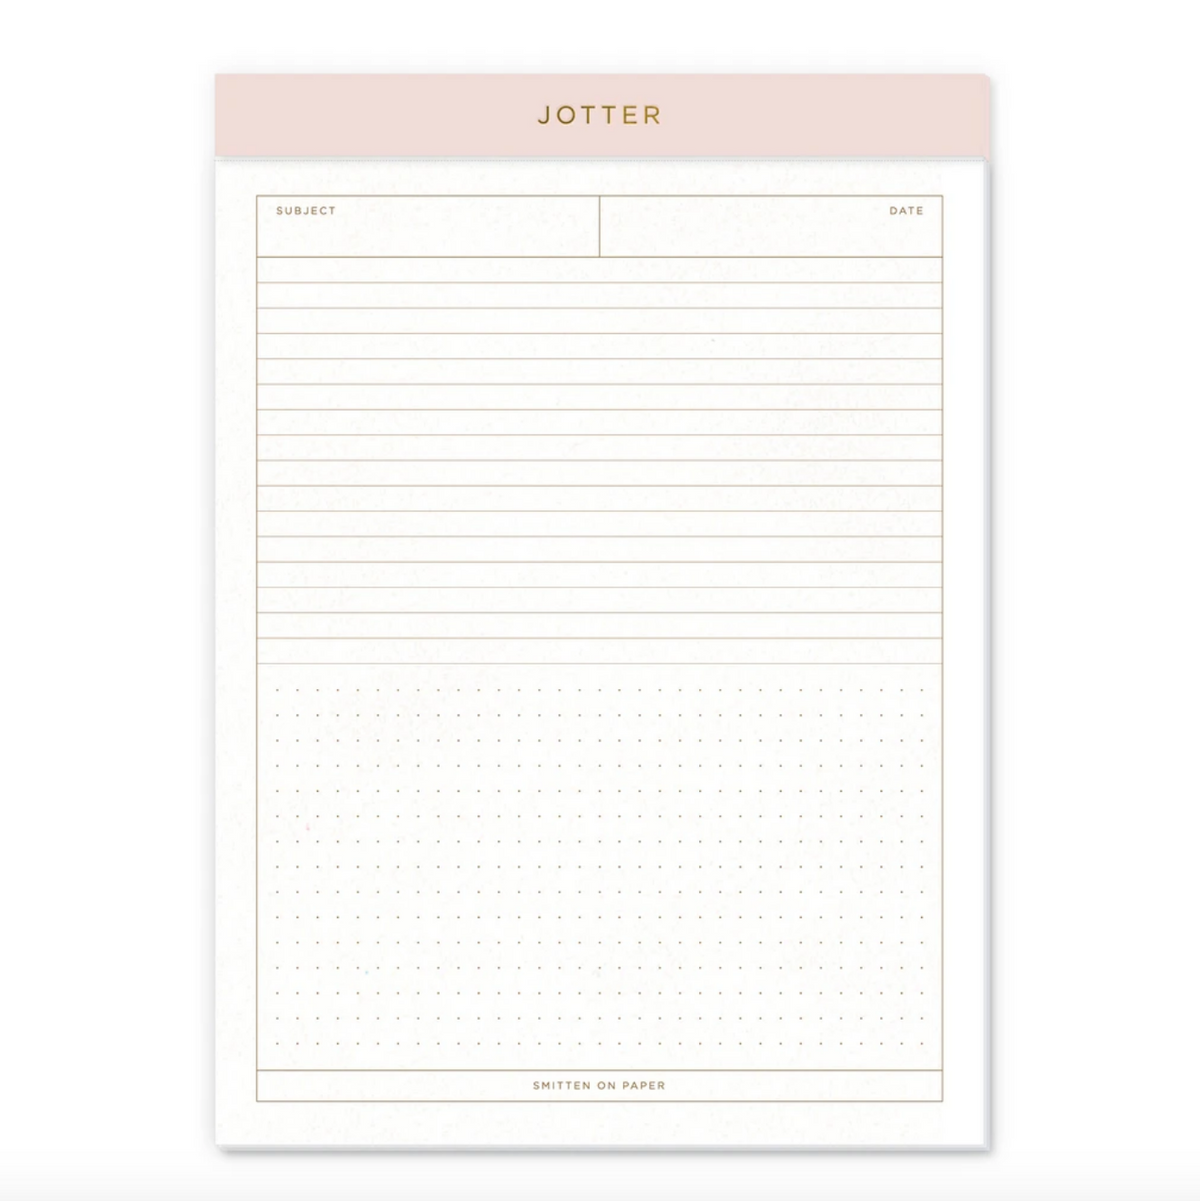 Smitten On Paper Jotter Legal Pad